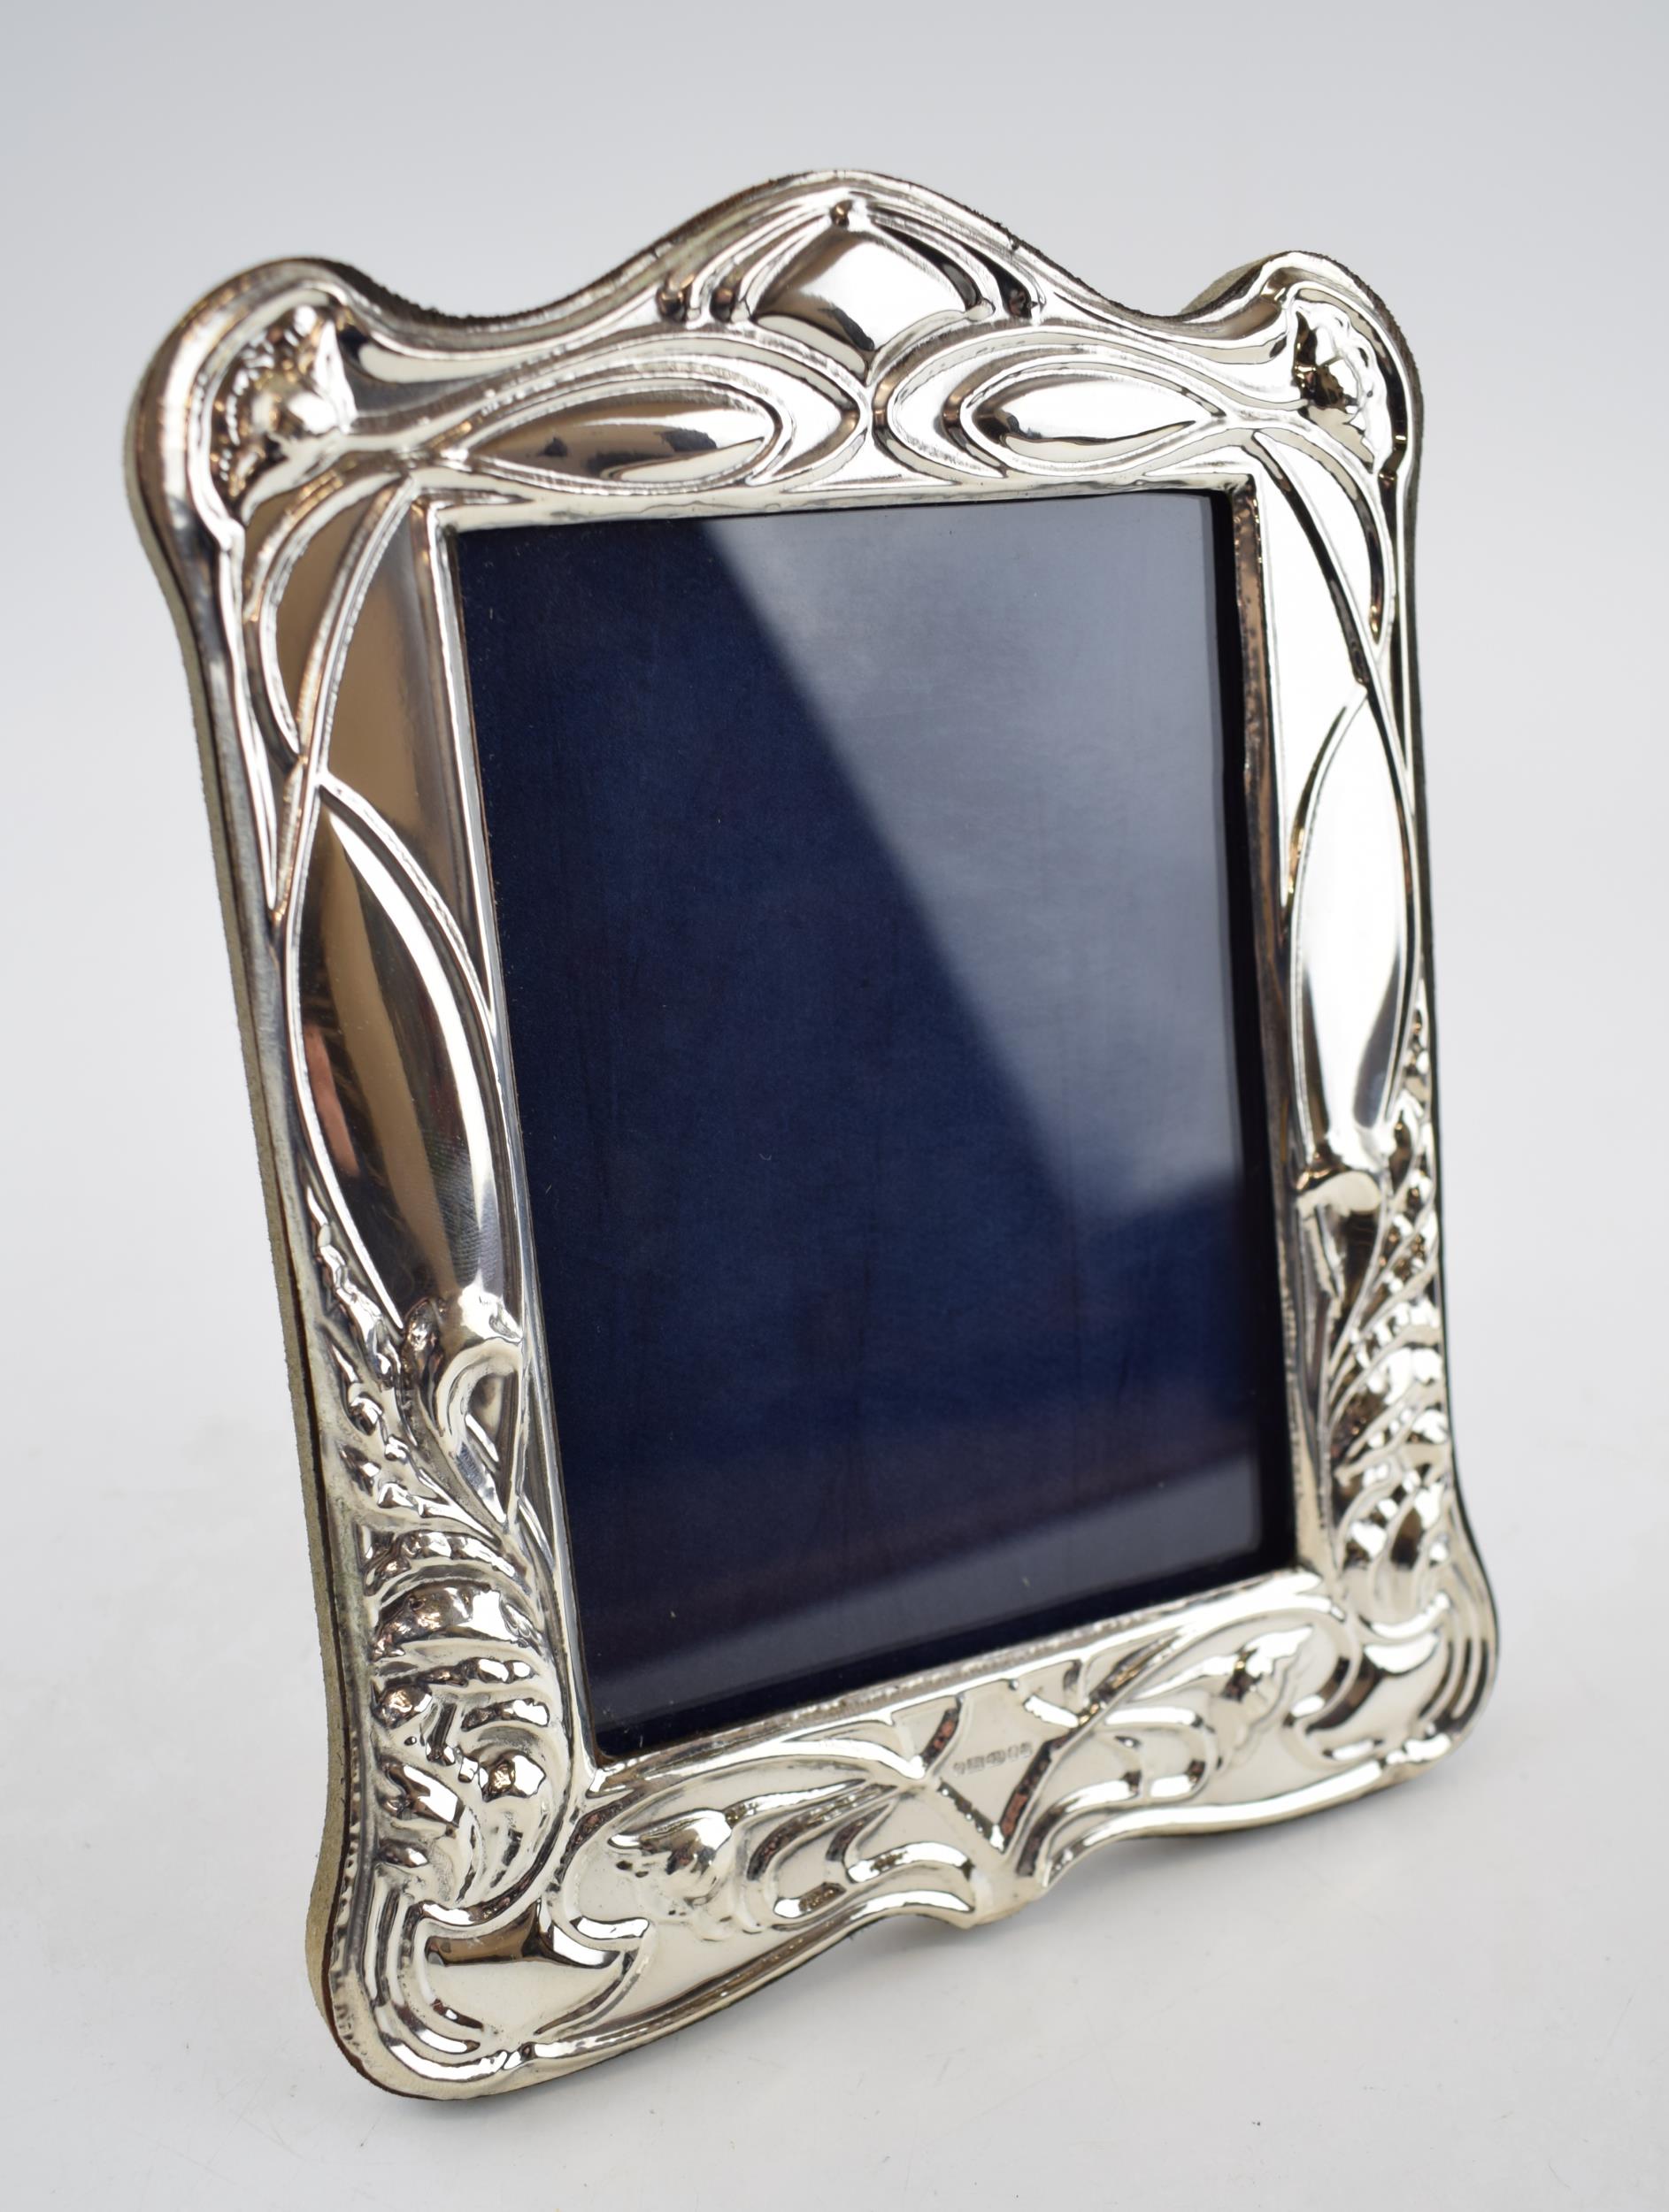 Hallmarked silver photo frame with easel back, 20cm tall, London 2021.